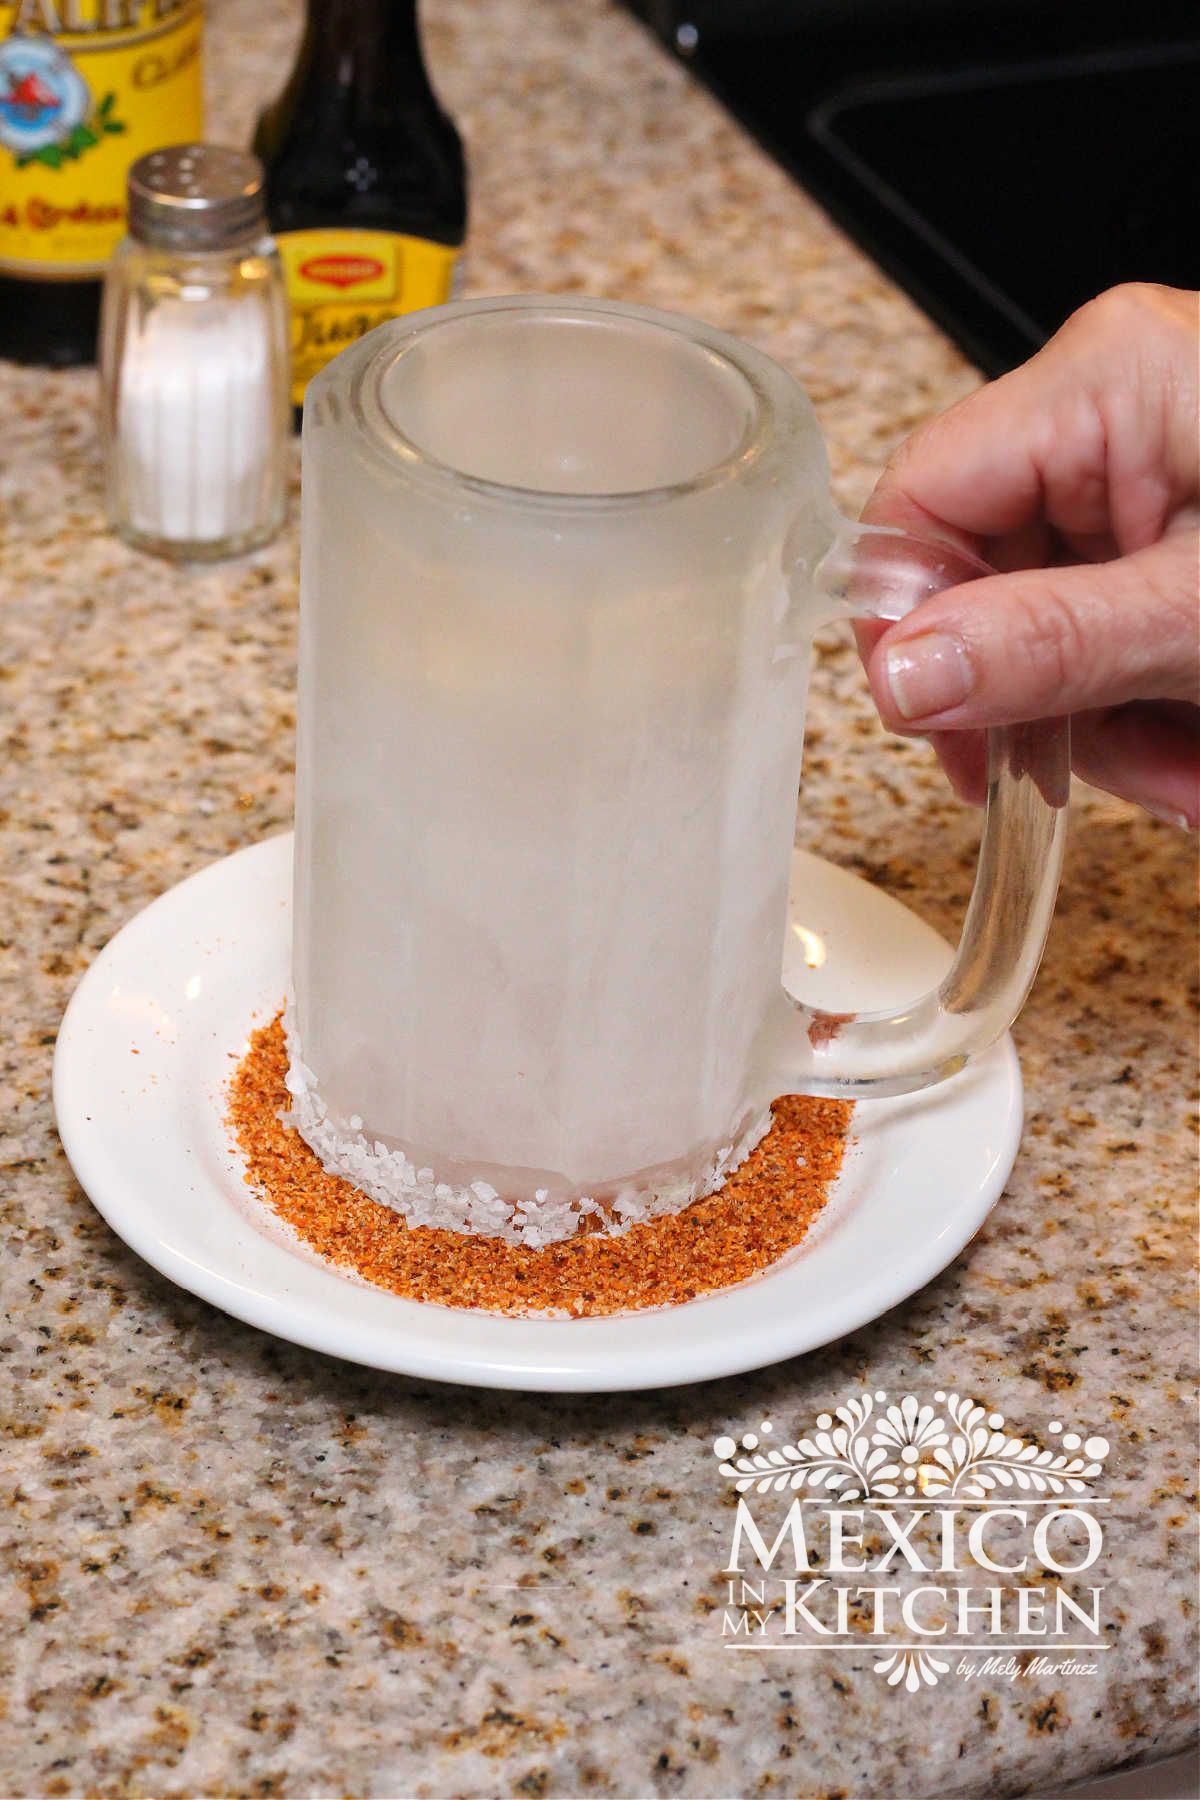 Frozen glass upside down in a container of salt and tajin powder.